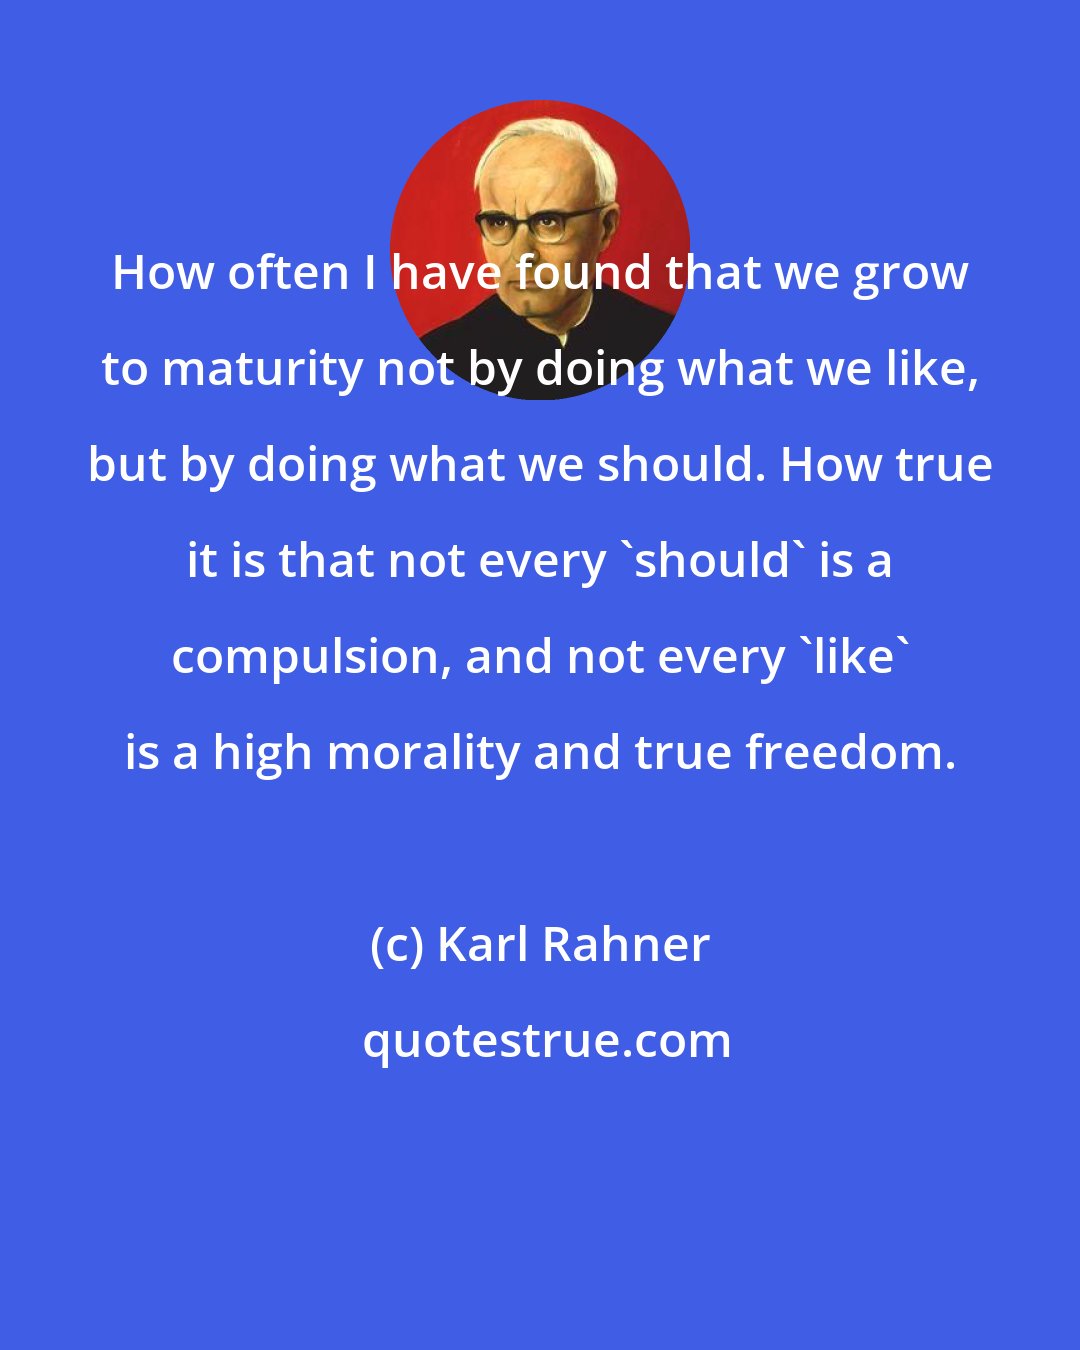 Karl Rahner: How often I have found that we grow to maturity not by doing what we like, but by doing what we should. How true it is that not every 'should' is a compulsion, and not every 'like' is a high morality and true freedom.